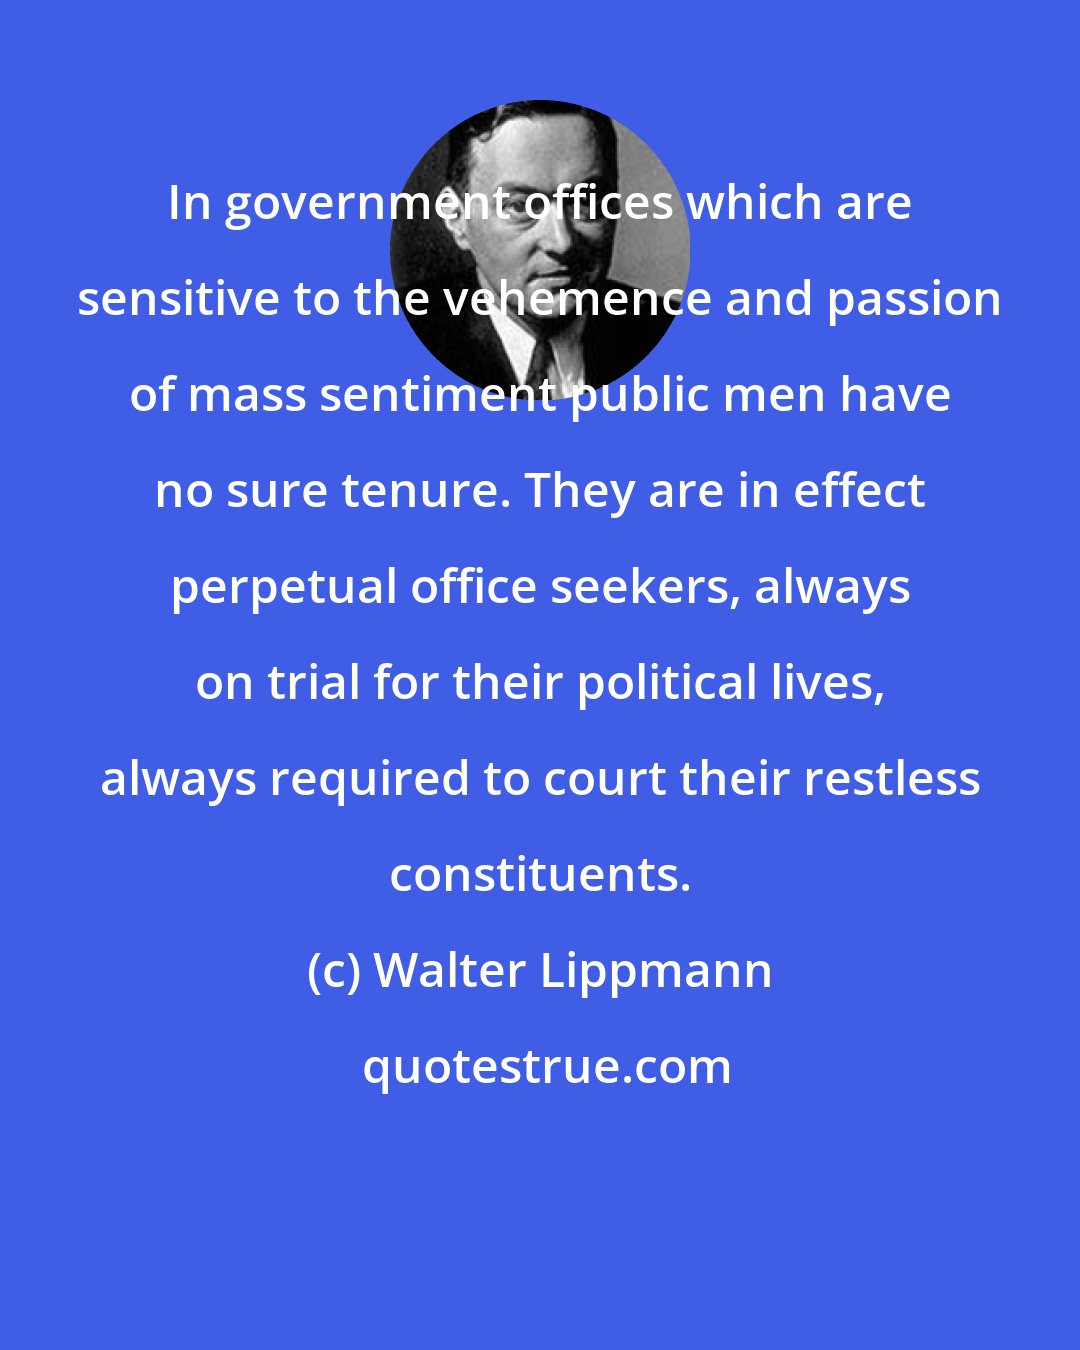 Walter Lippmann: In government offices which are sensitive to the vehemence and passion of mass sentiment public men have no sure tenure. They are in effect perpetual office seekers, always on trial for their political lives, always required to court their restless constituents.